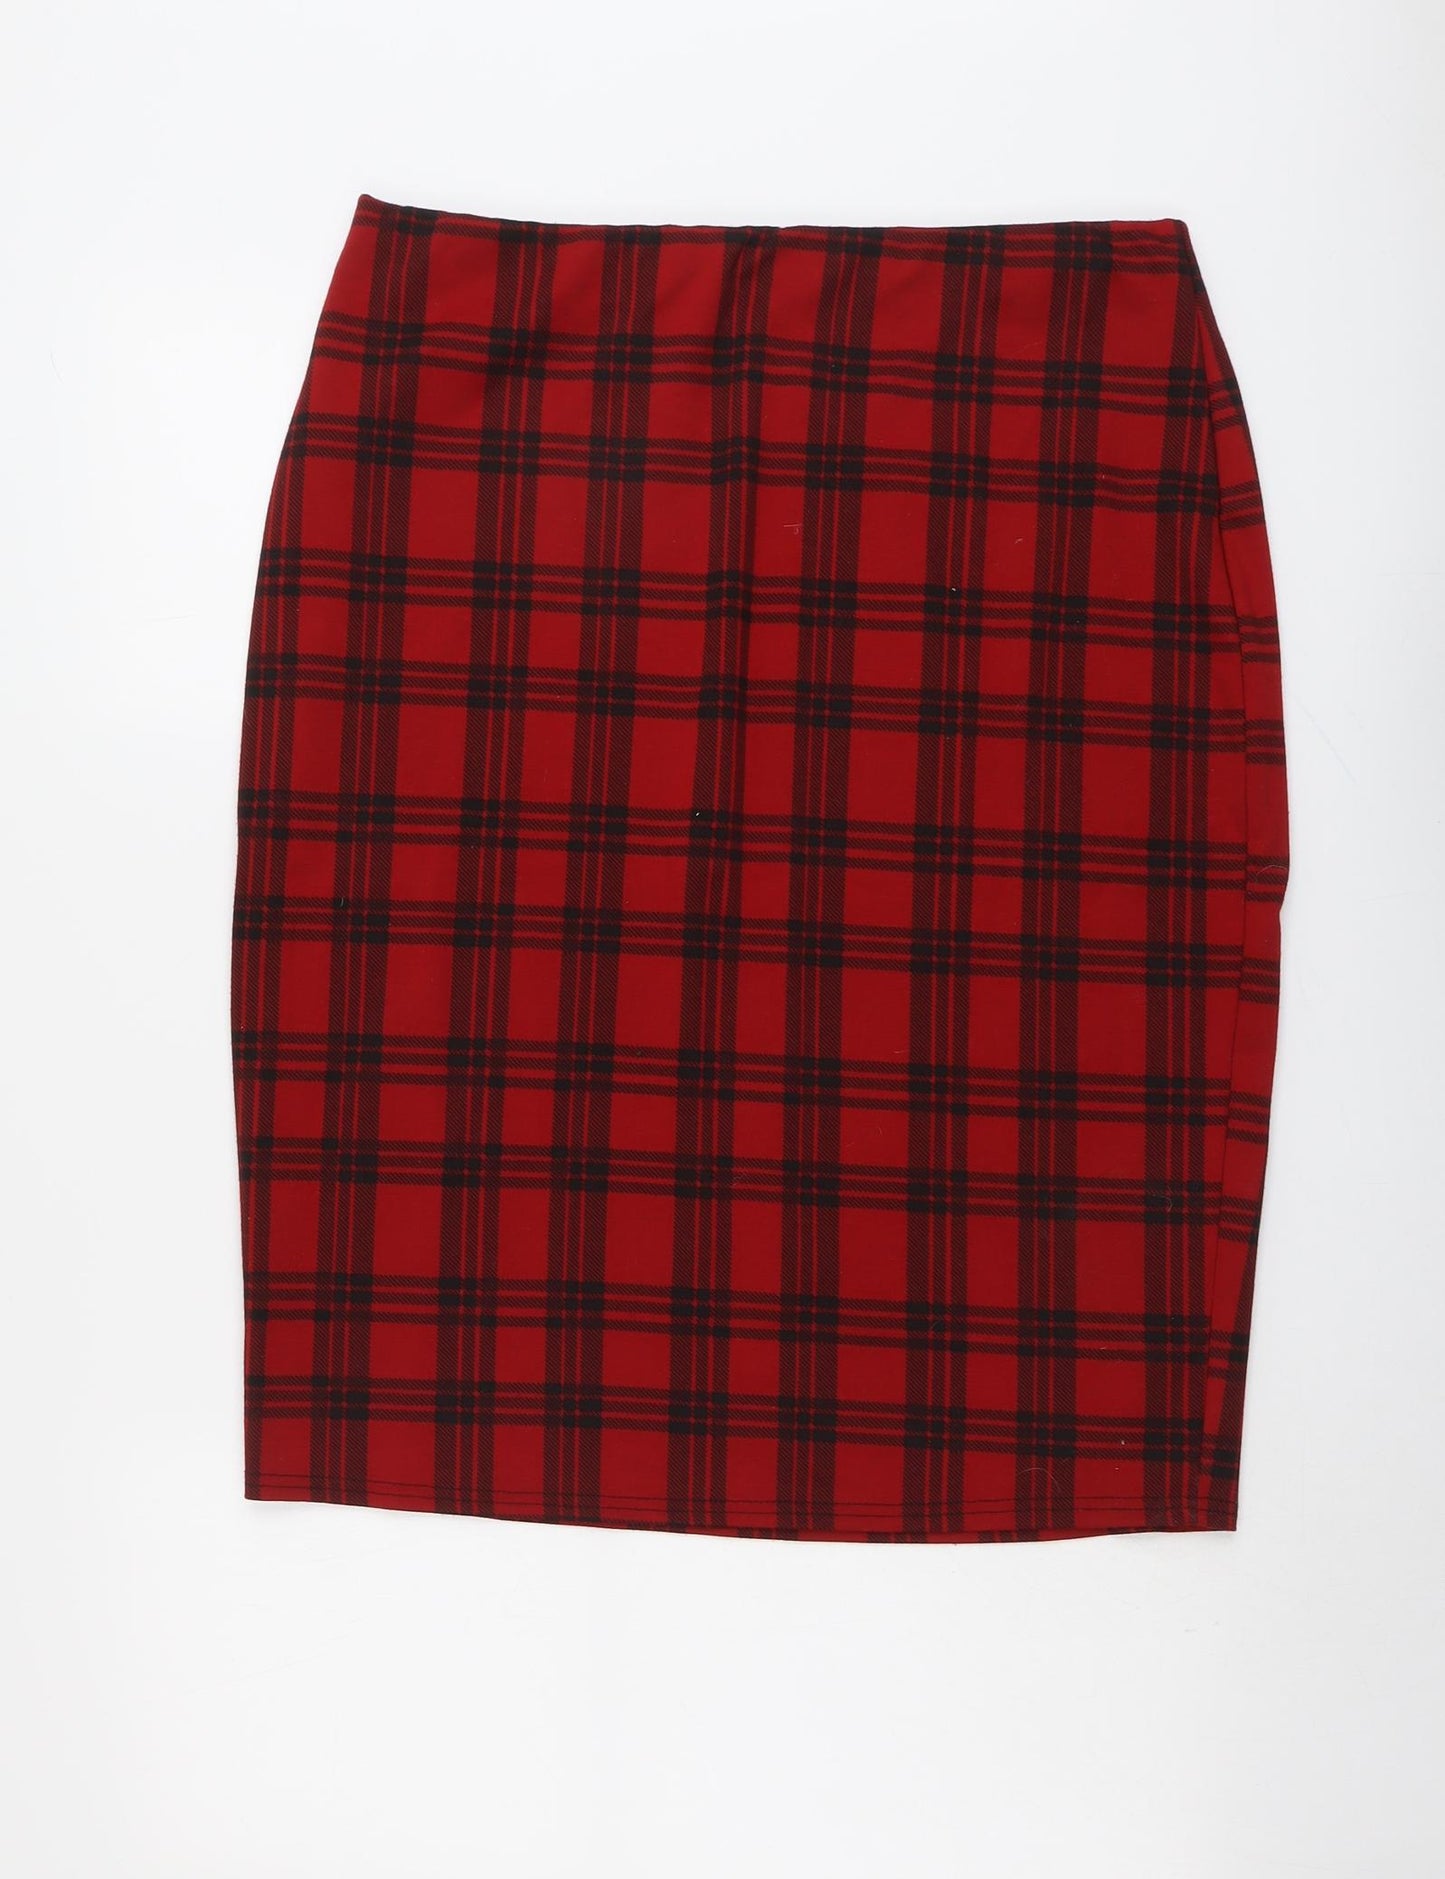 Simply Be Womens Red Plaid Polyester Bandage Skirt Size 22